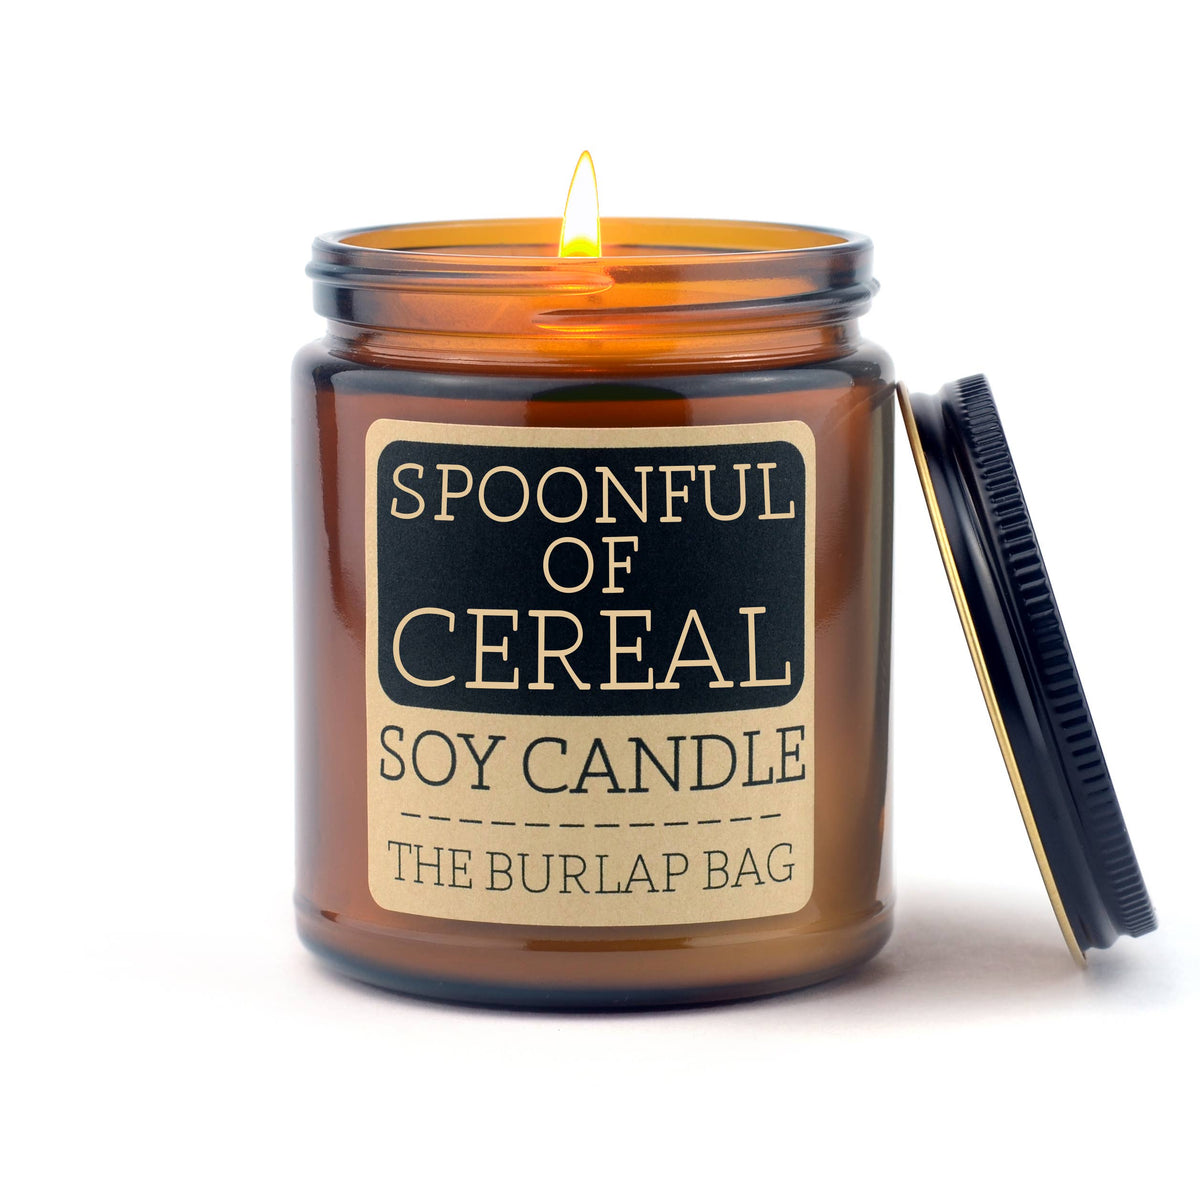 Spoonful of Cereal 9oz soy candle